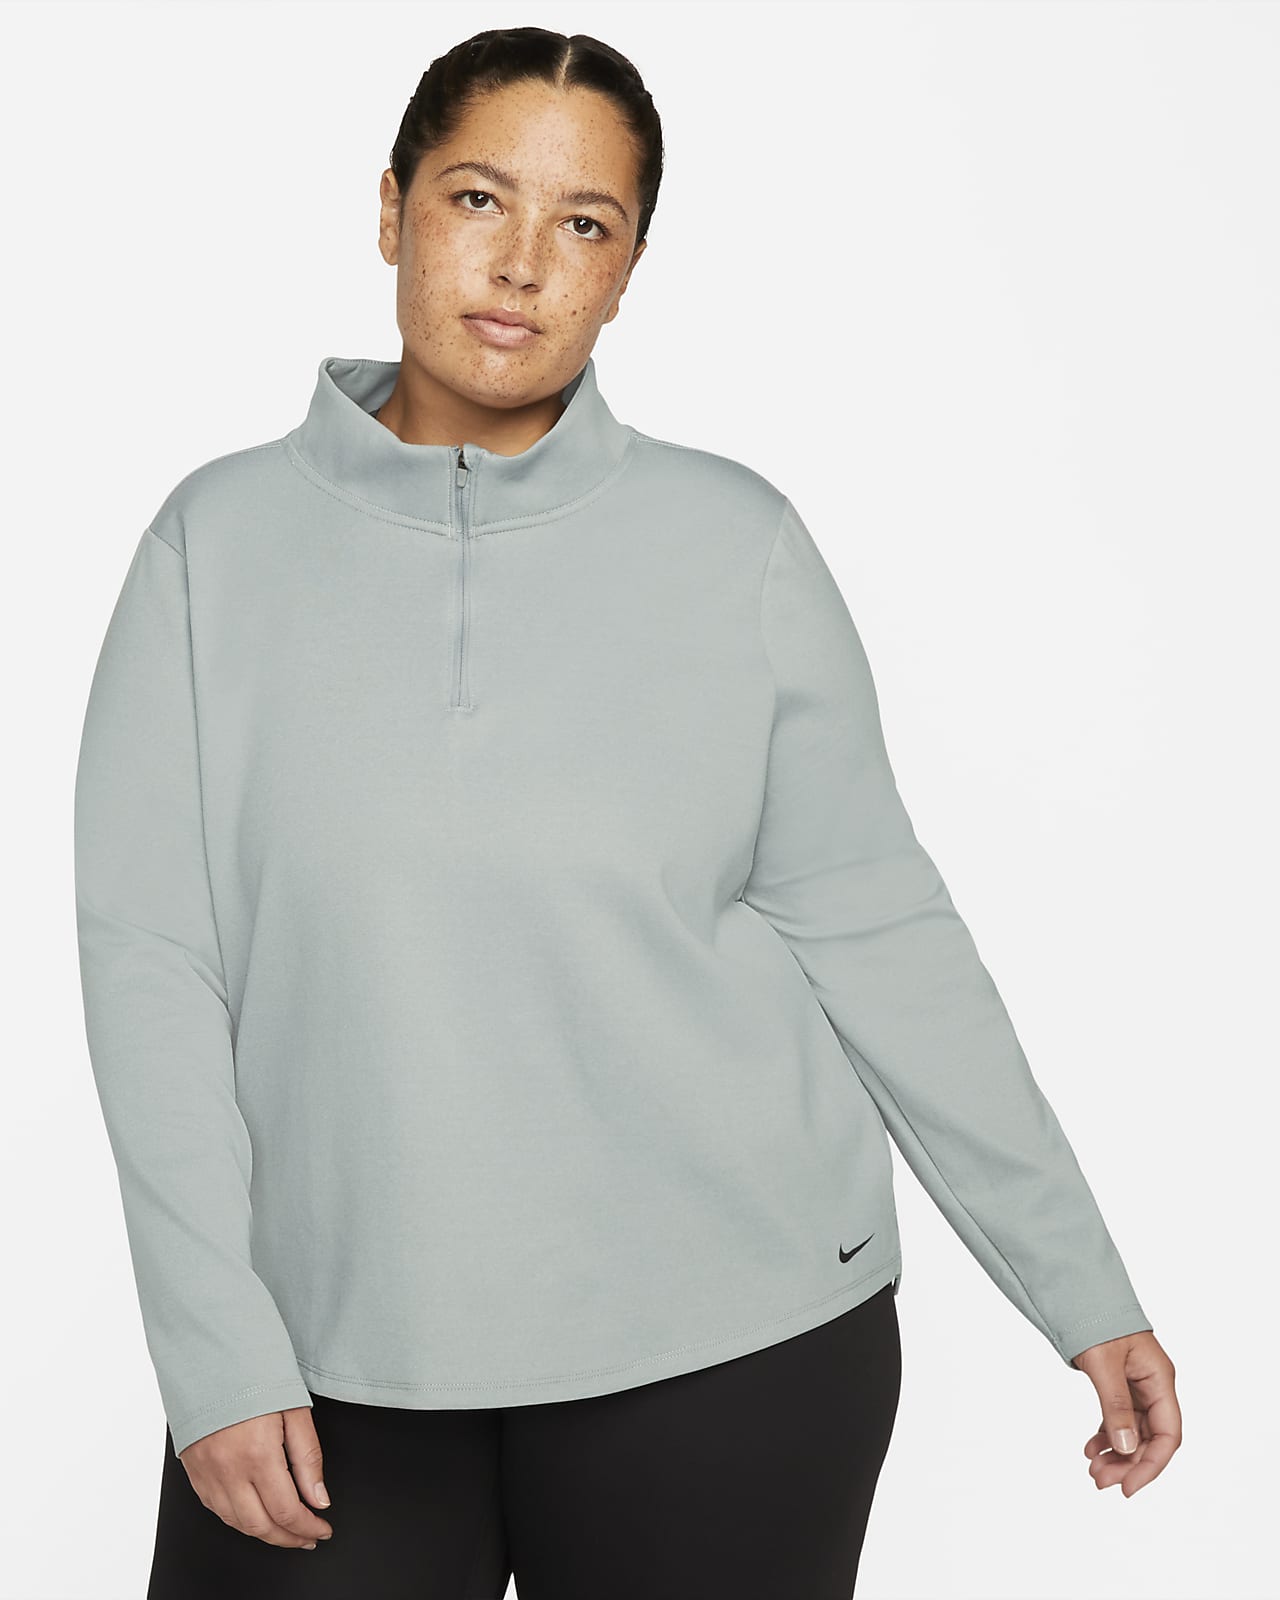 Therma-FIT One Long-Sleeve 1/2-Zip Top (Plus Size).